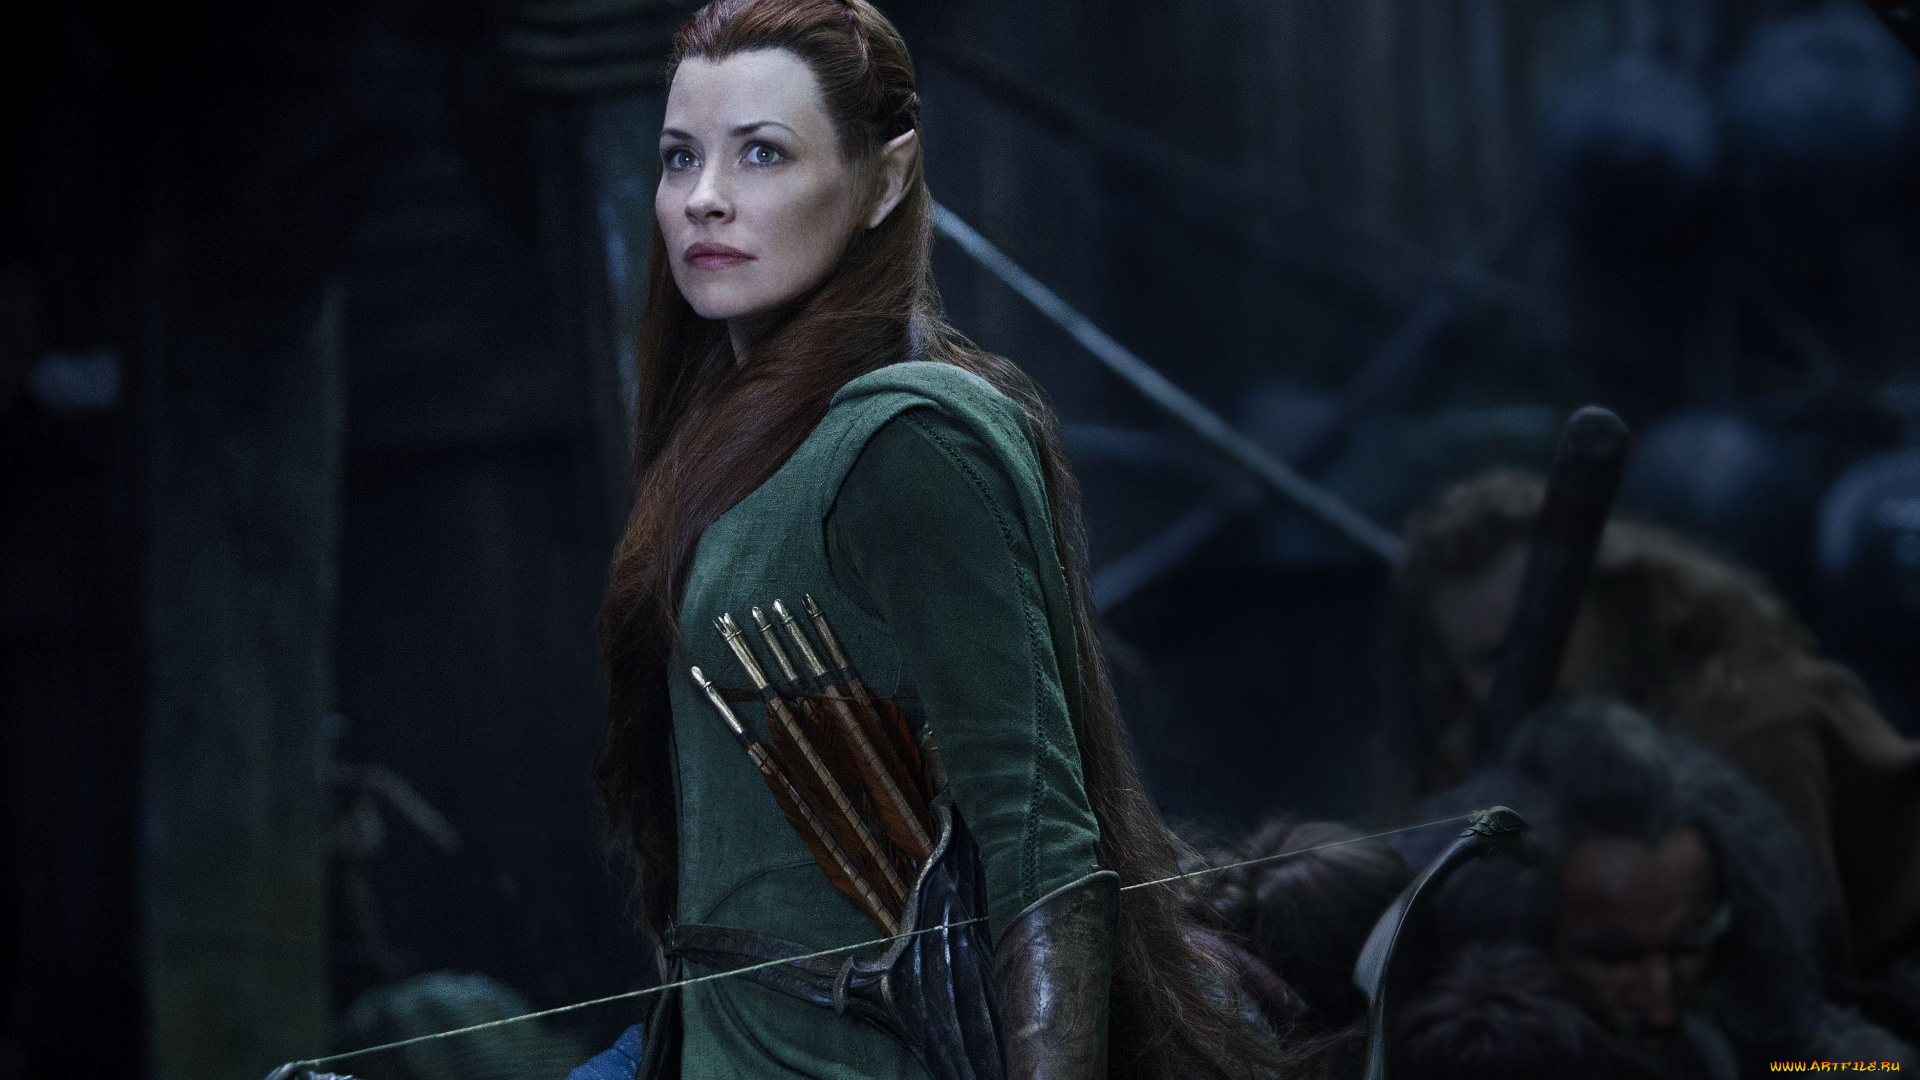 кино, фильмы, the, hobbit, , the, battle, of, the, five, armies, tauriel, evangeline, lilly, 2014, film